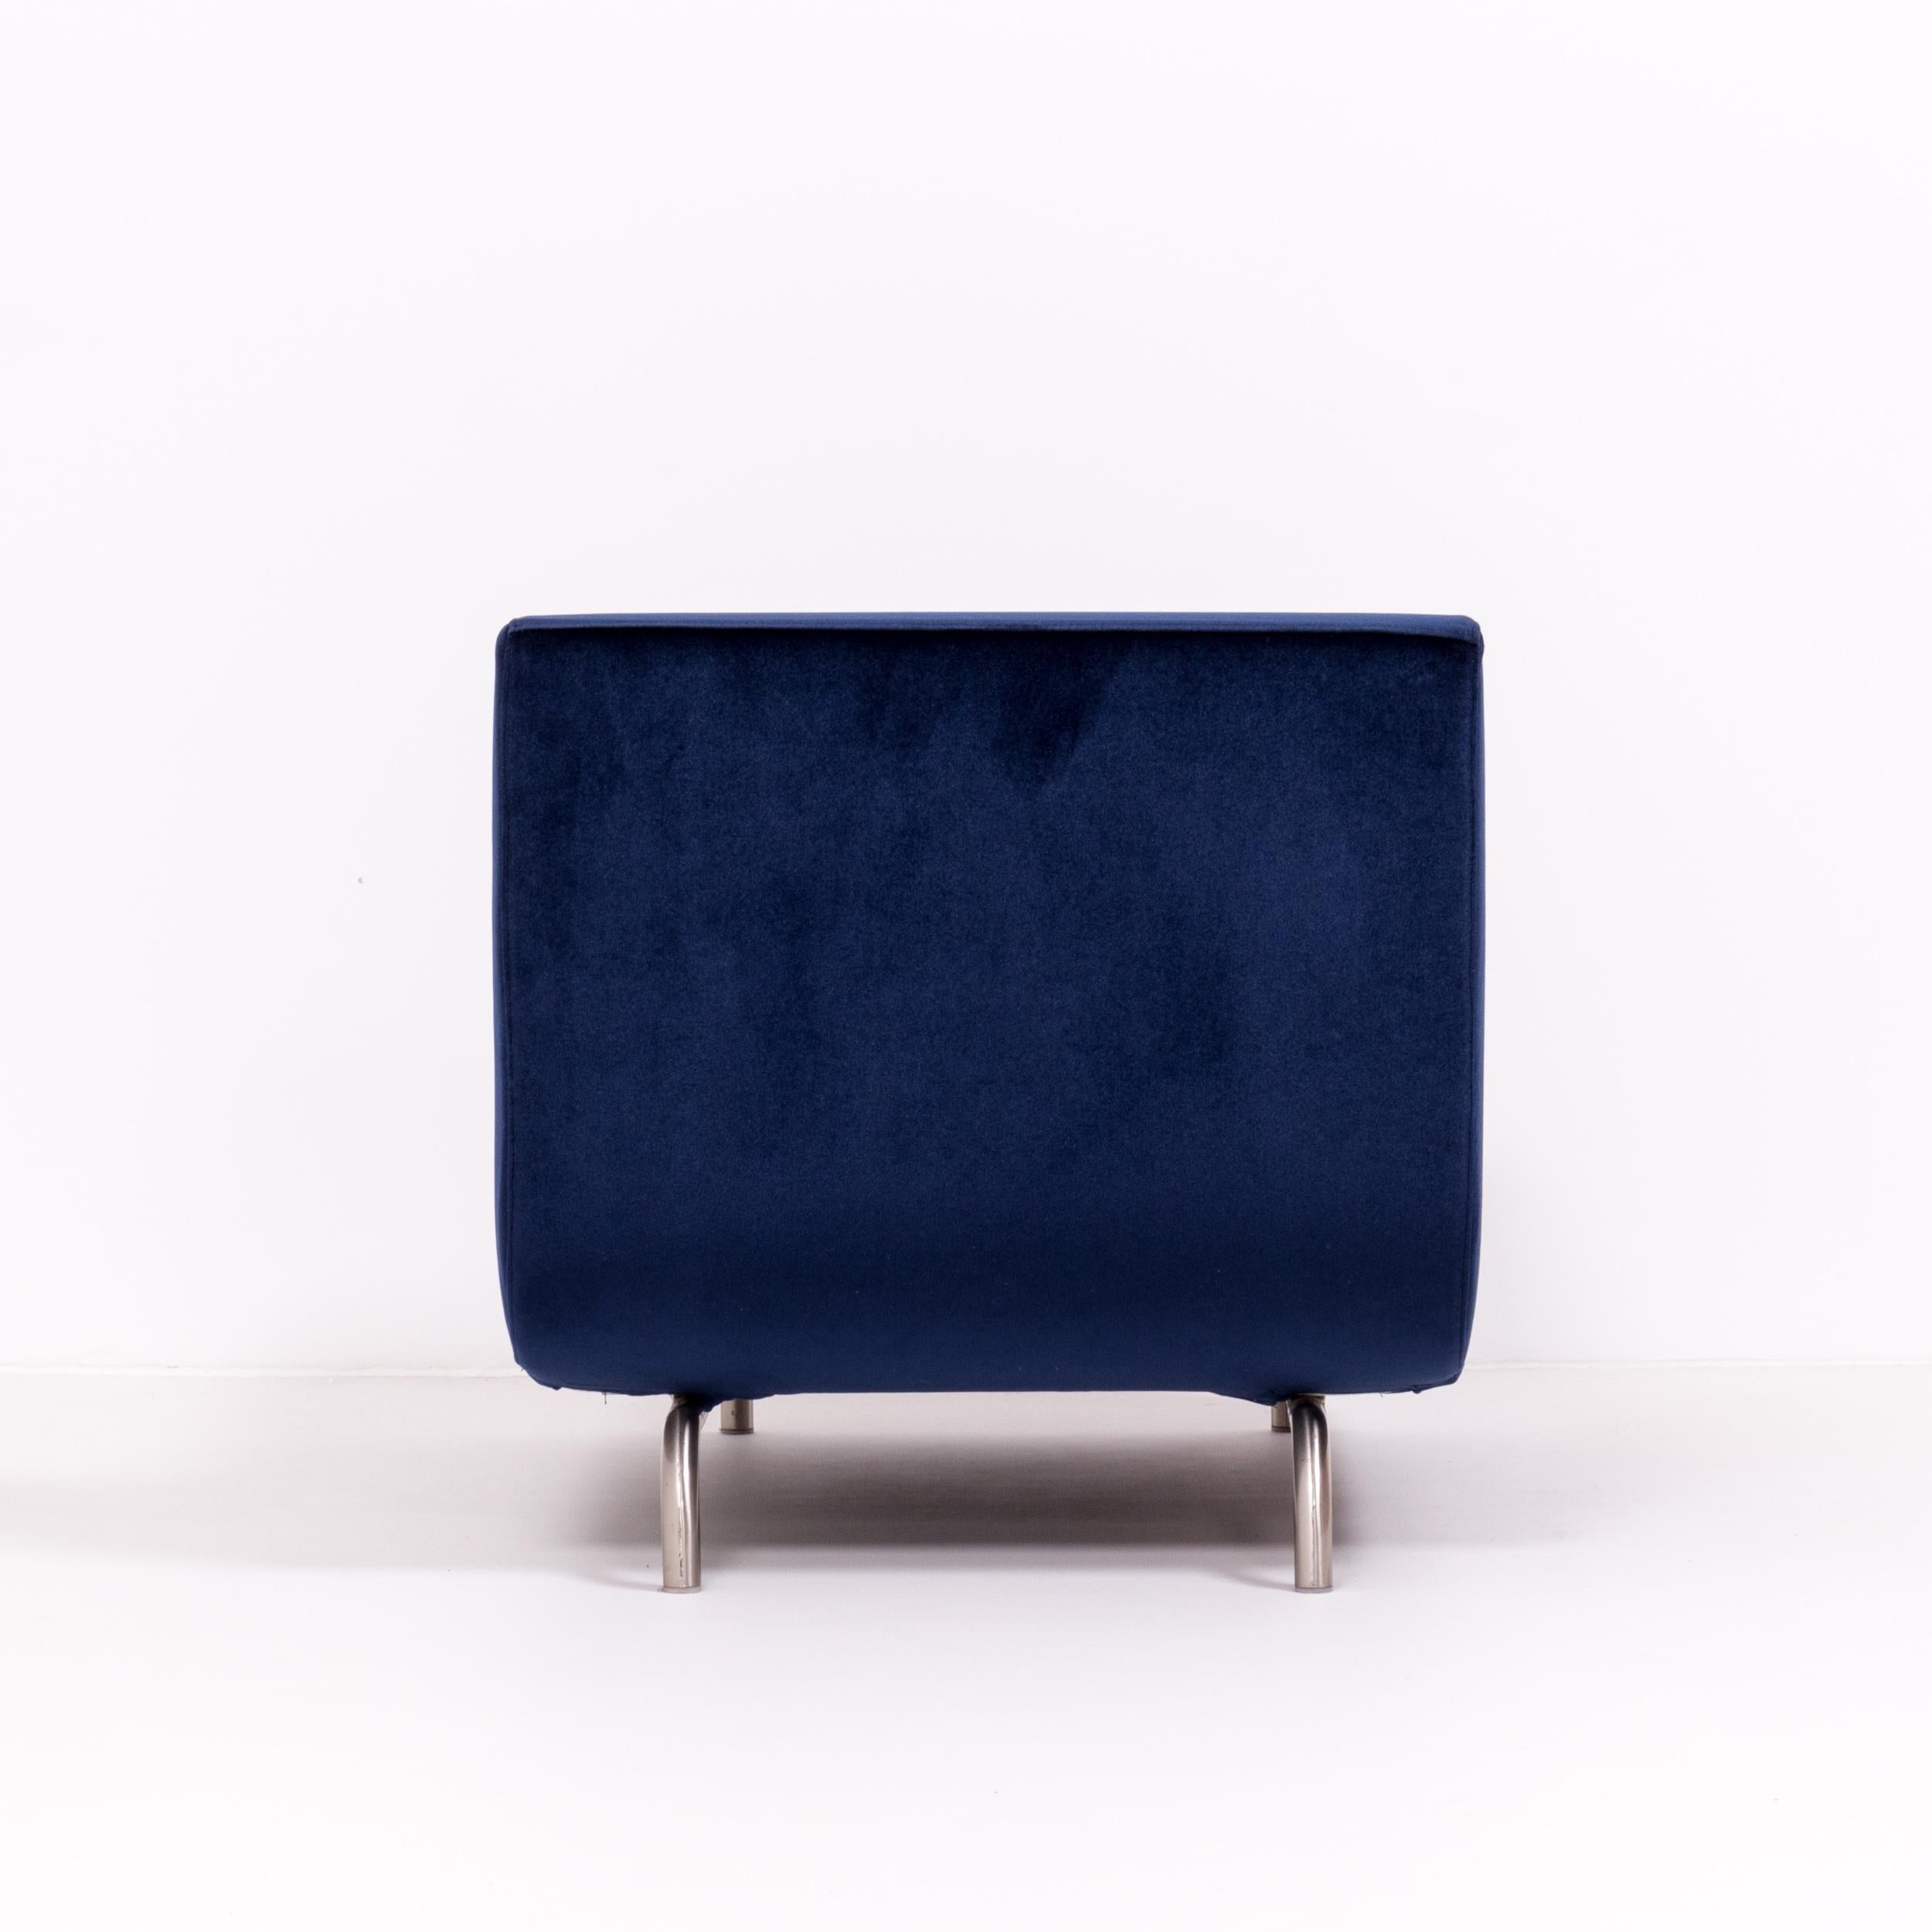 Minotti by Rodolfo Dordoni Dubuffet Navy Blue Armchairs, Set of 2 In Good Condition For Sale In London, GB